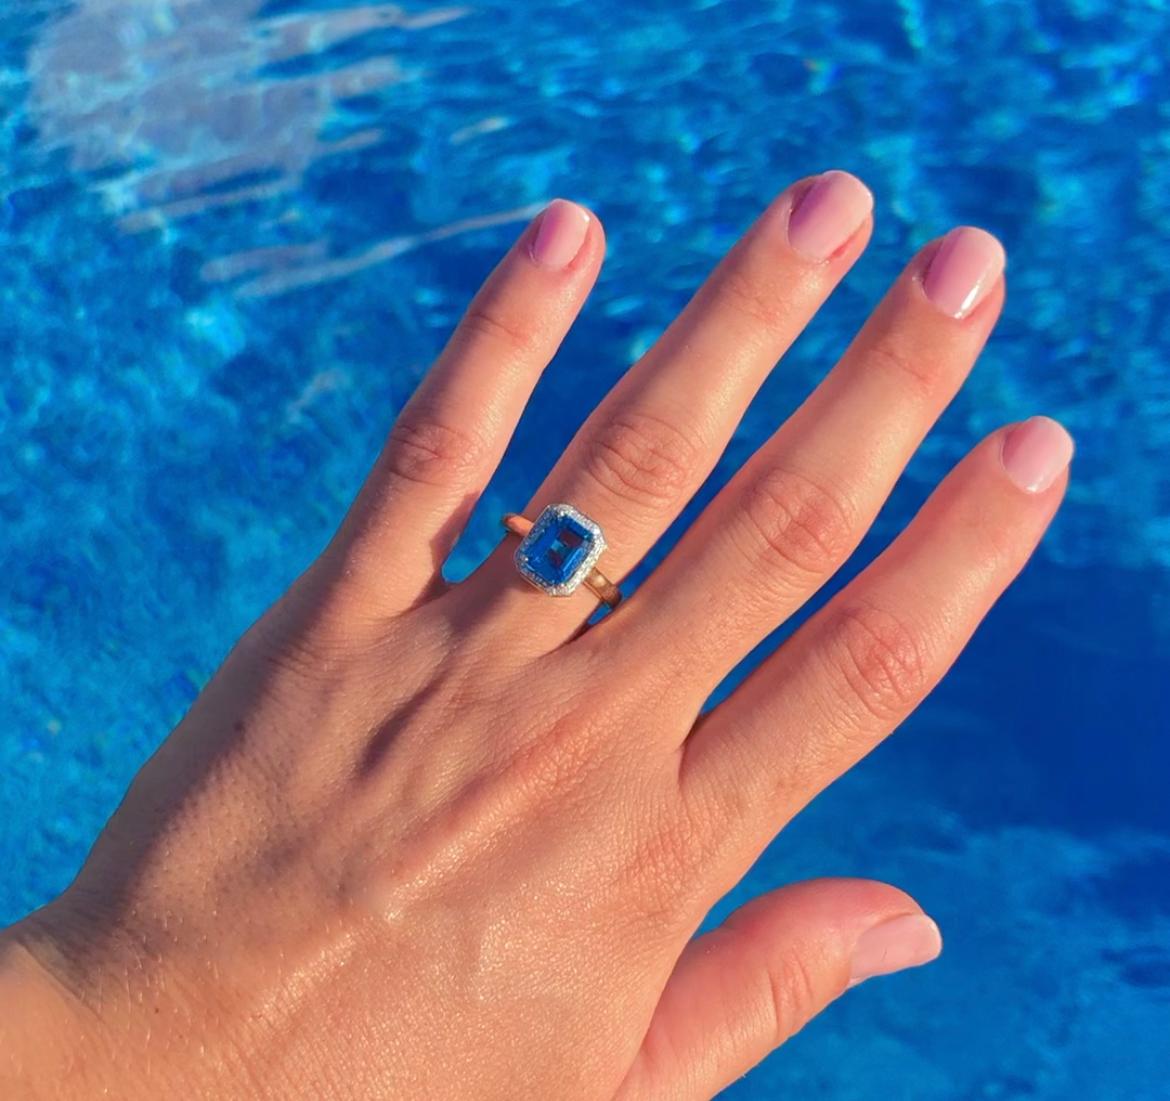 Discover the stylish design of our gemstone rings including this beautiful cocktail ring. The Blue Topaz Ring features a diamond halo. Perfect as a gemstone engagement ring, promise ring, something blue, or a fashion ring.

Diamond weight: 0.11 ct